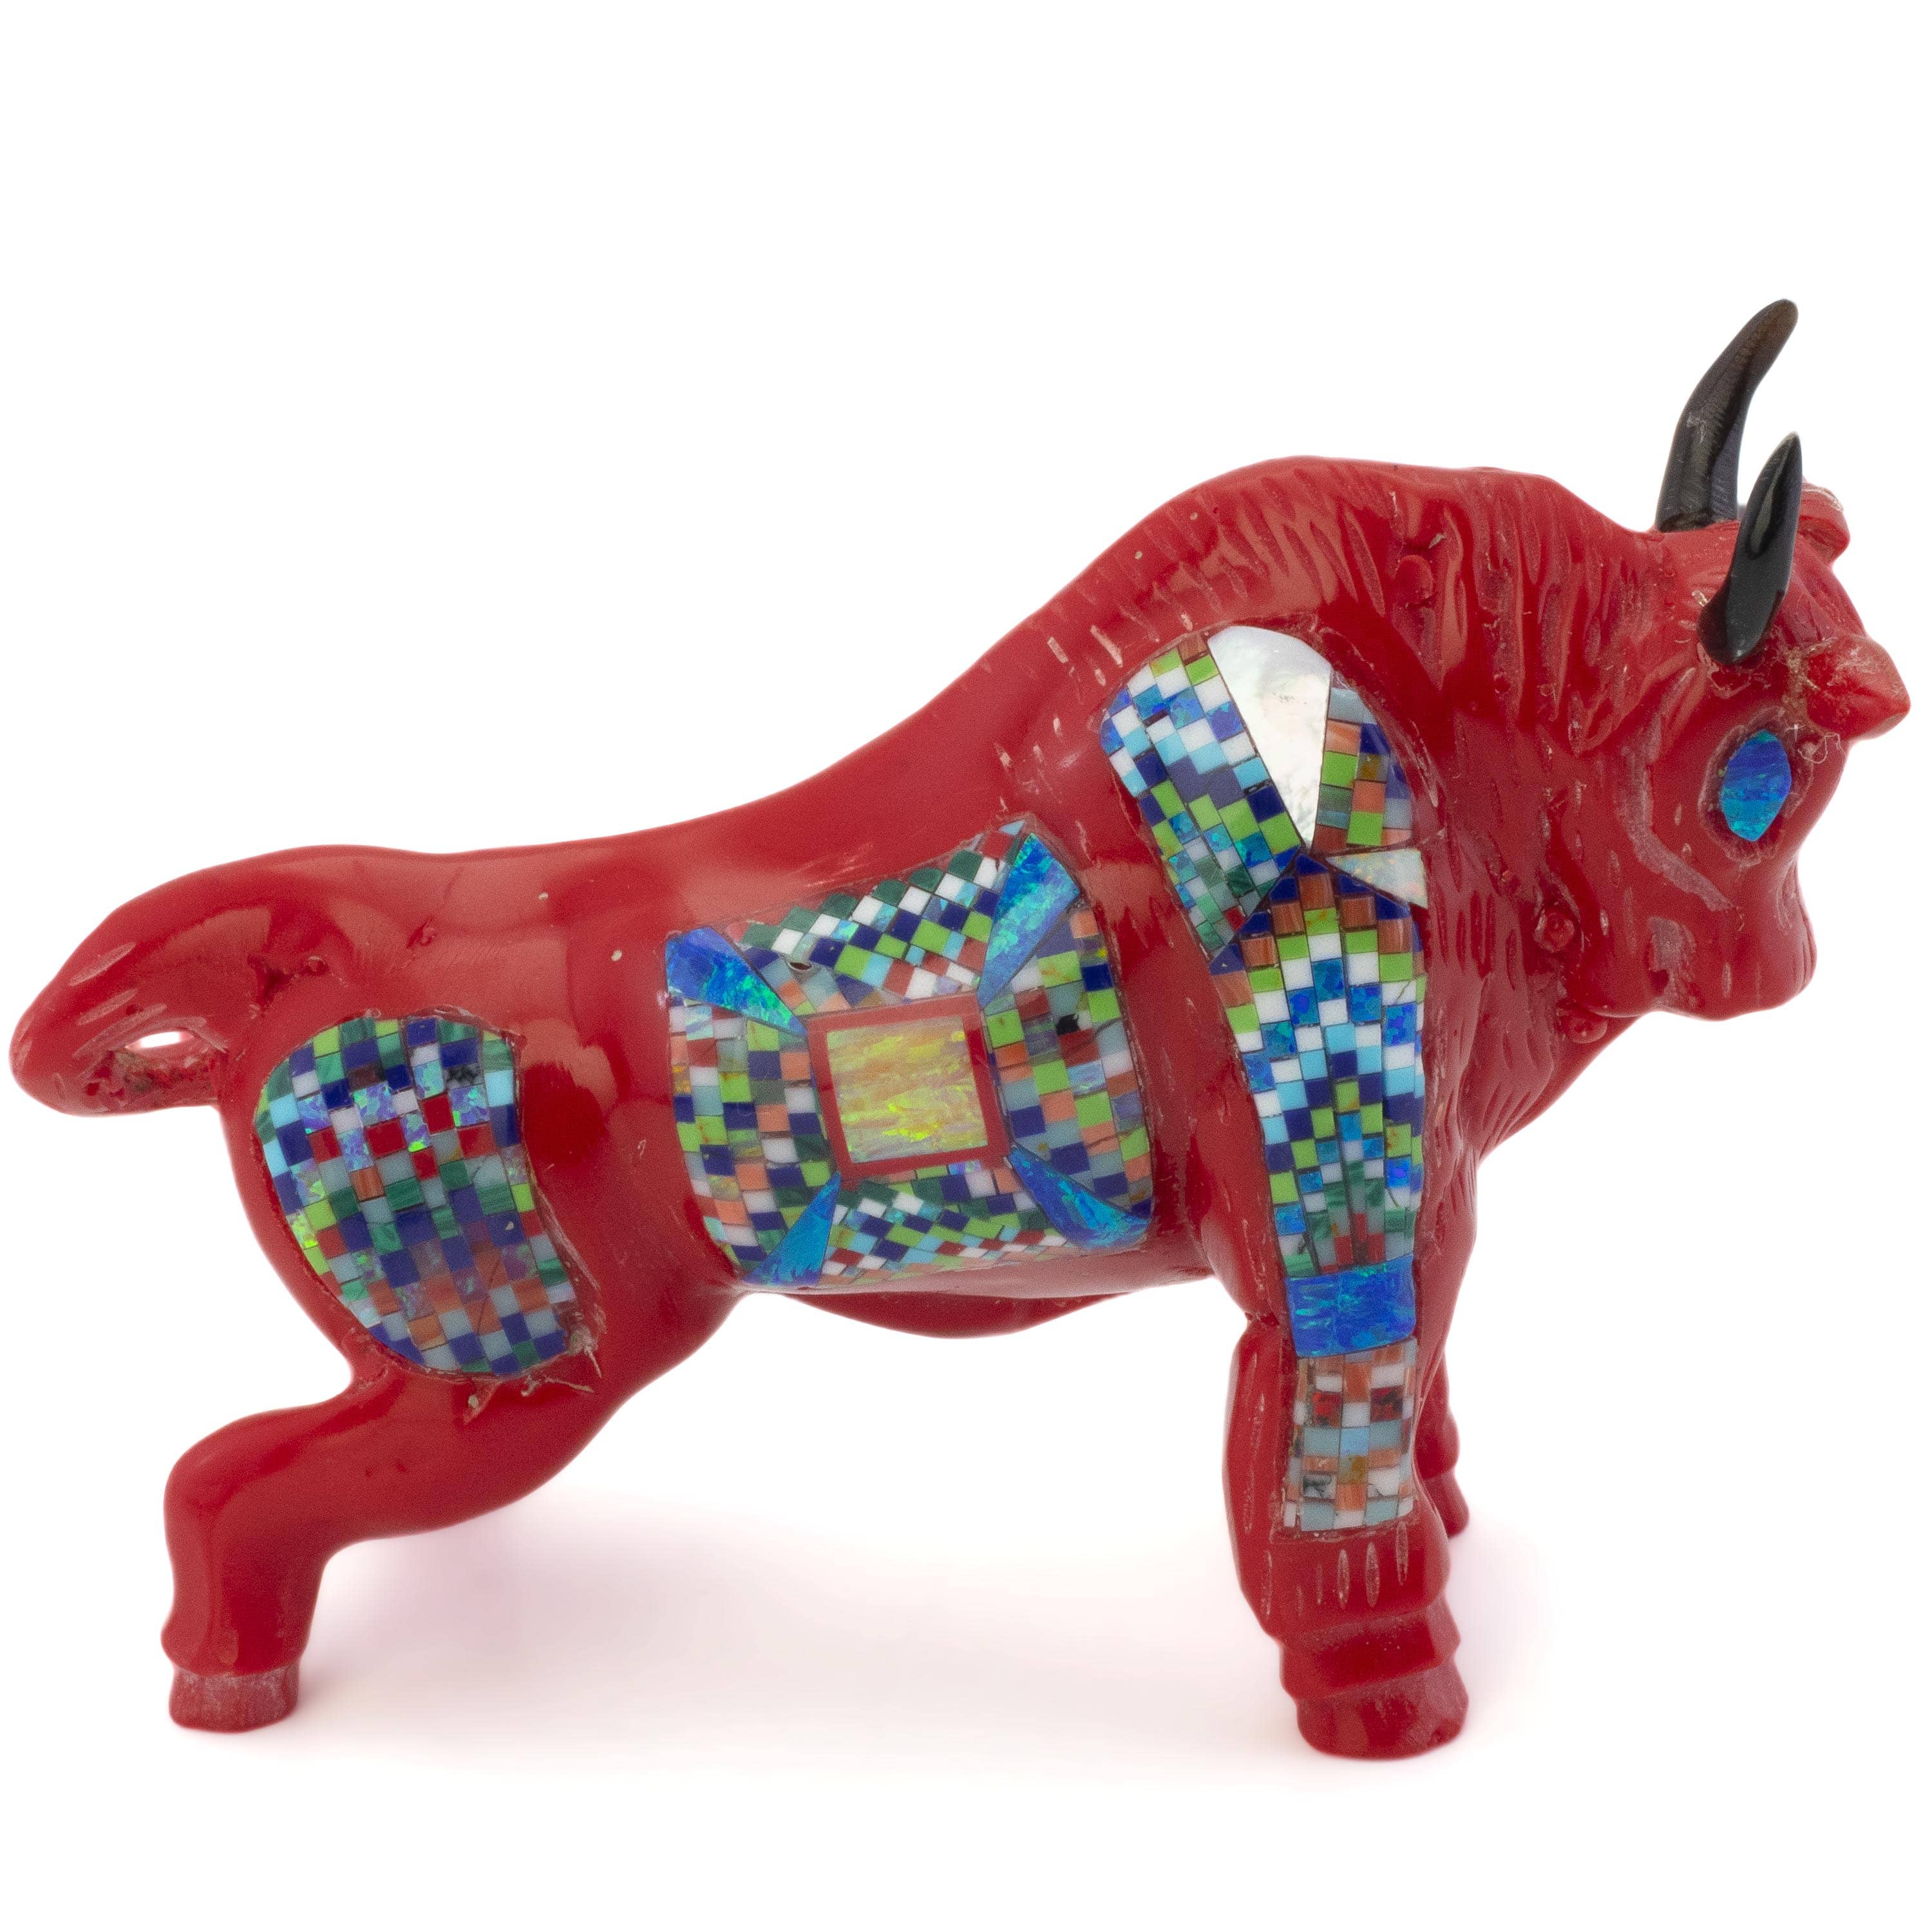 KALIFANO Southwest Silver Jewelry Multi Gem Opal Micro Inlay Handmade Red Sponge Coral Bull Carving AKC800.002